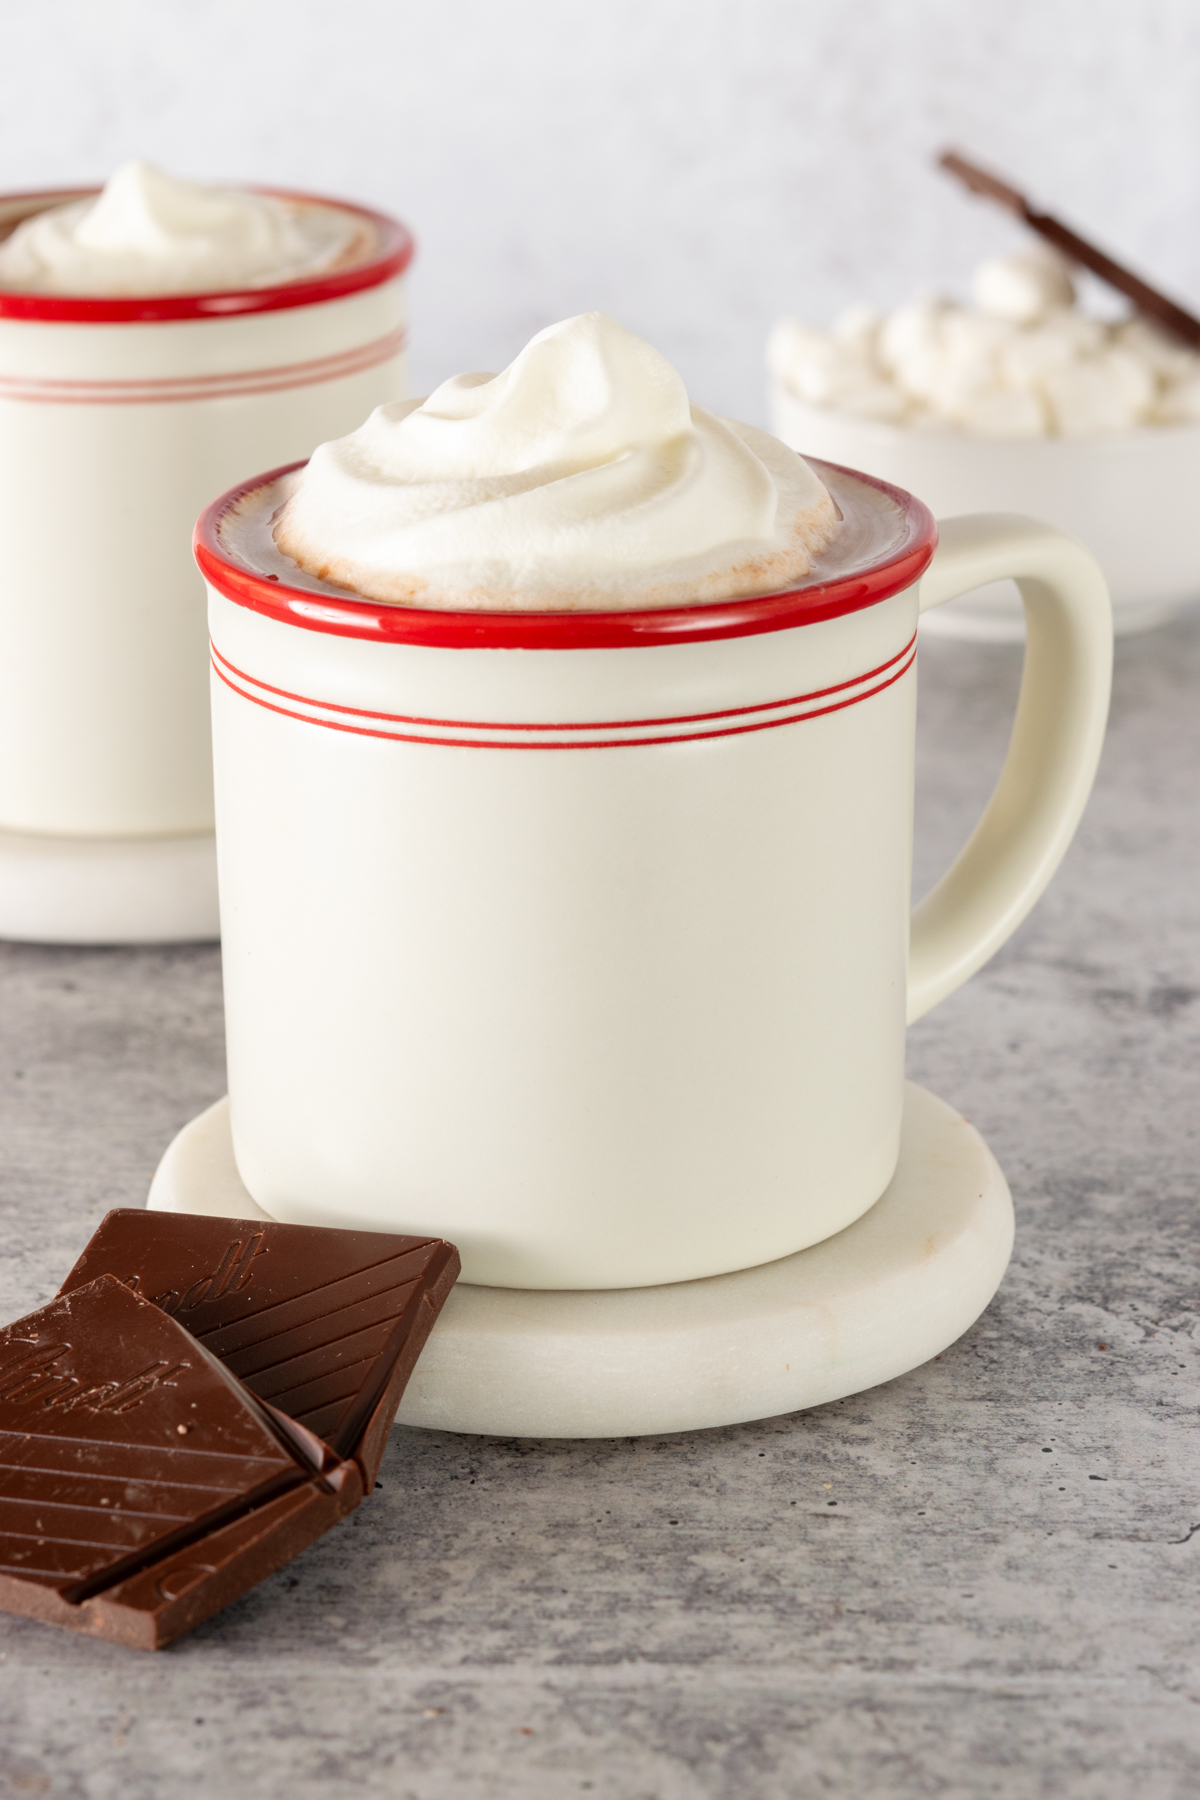 Two cups of creamy homemade hot chocolate and pieces of dark chocolate.